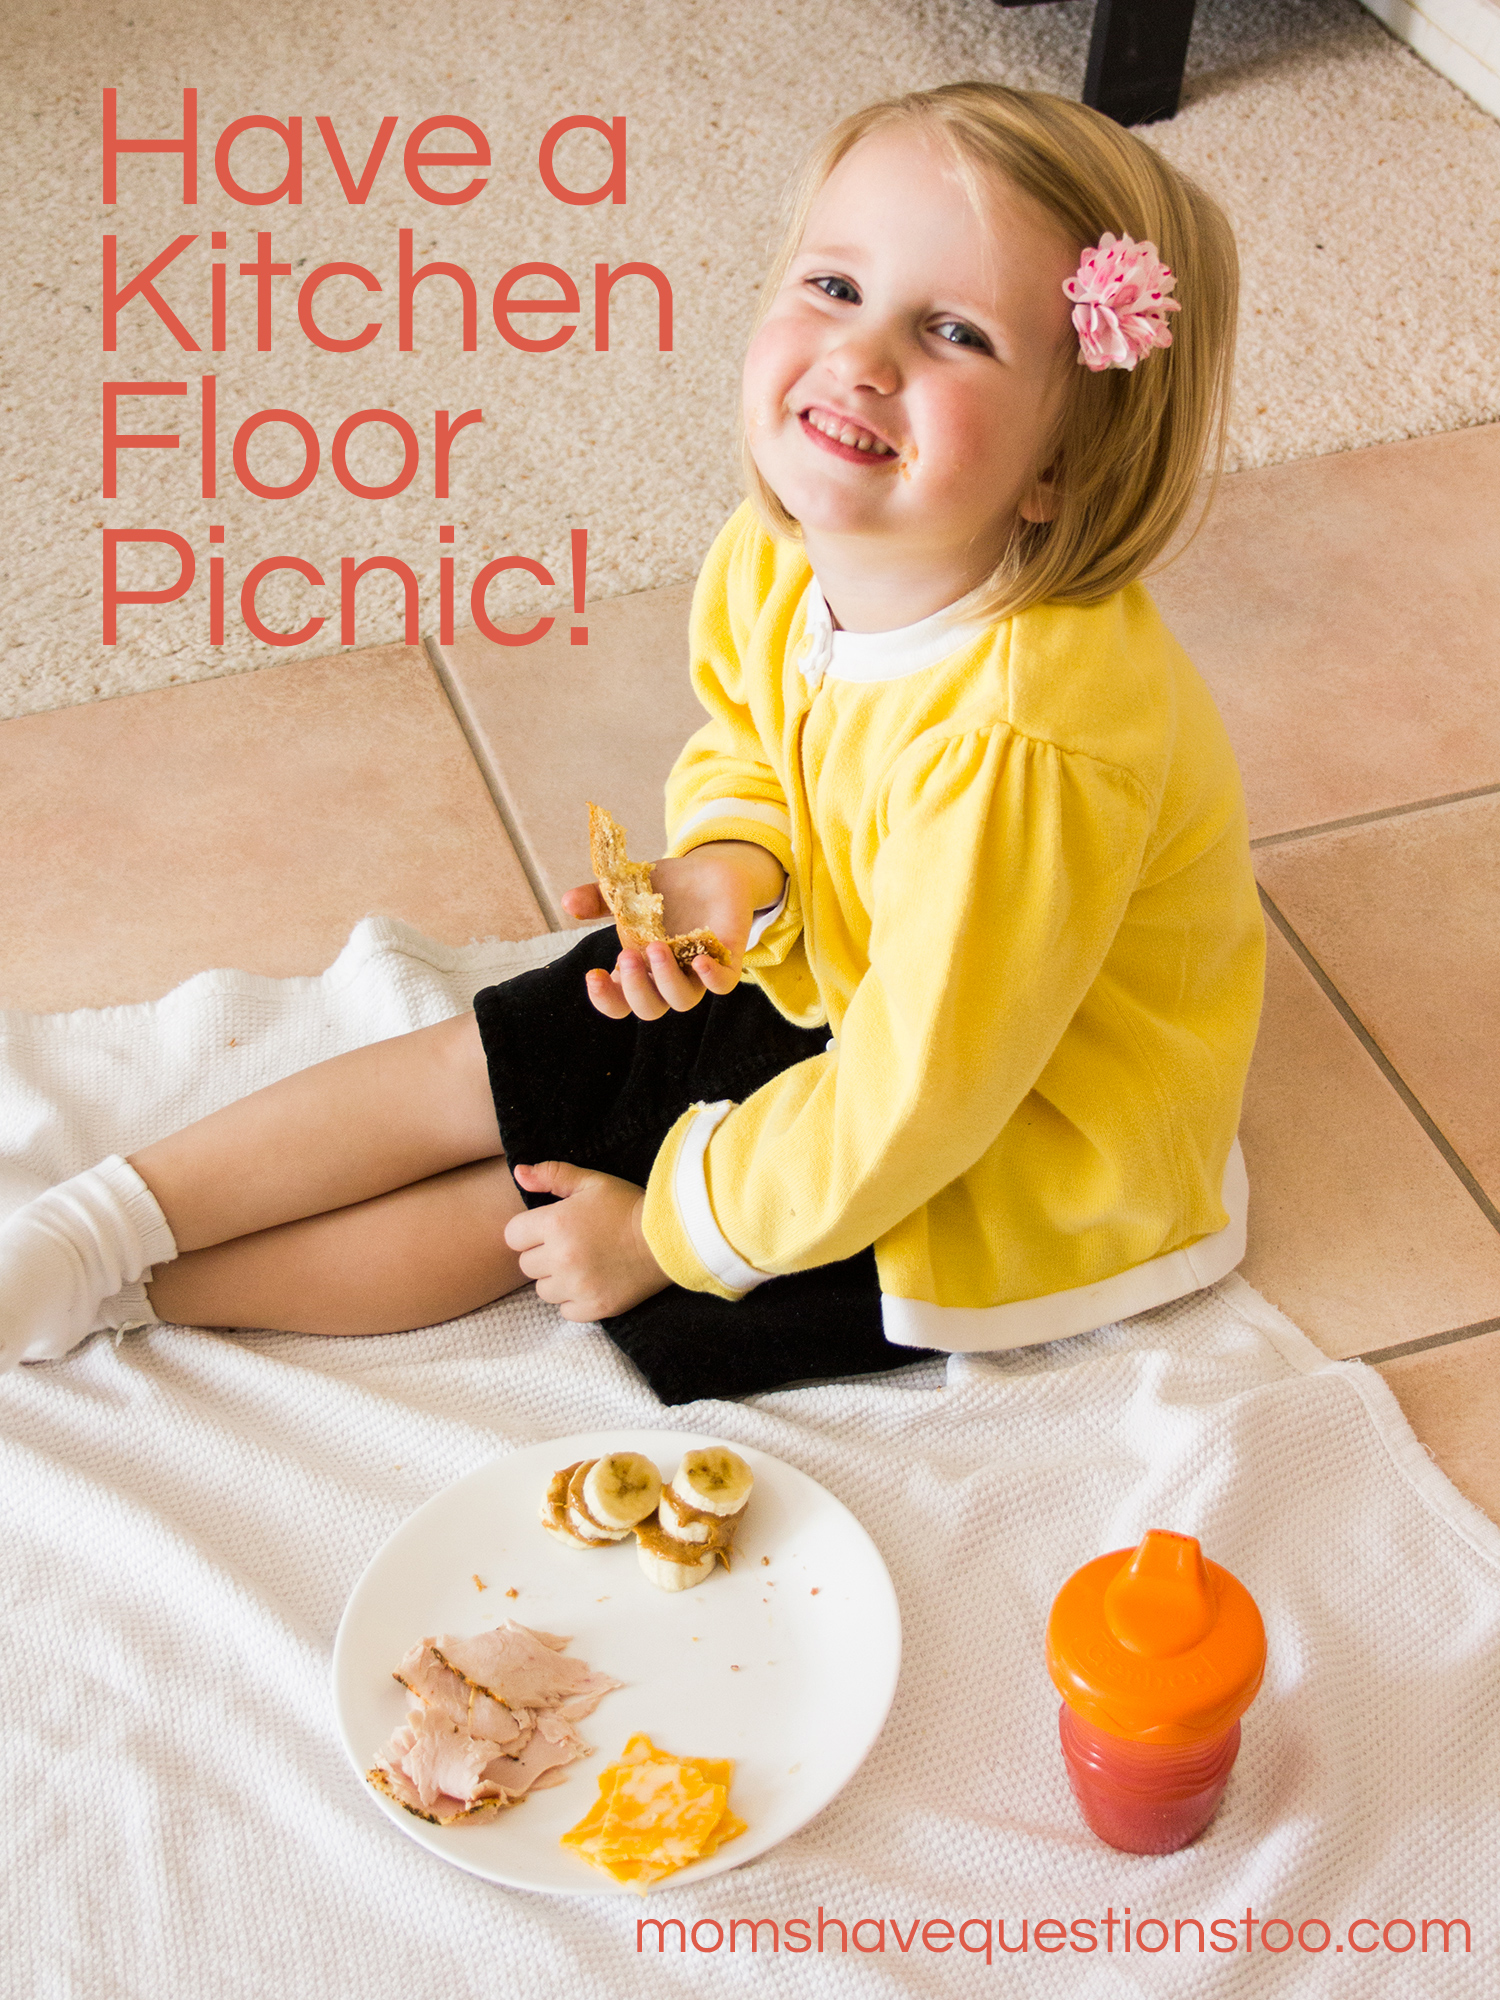 Kitchen Floor Picnic -- Moms Have Questions Too